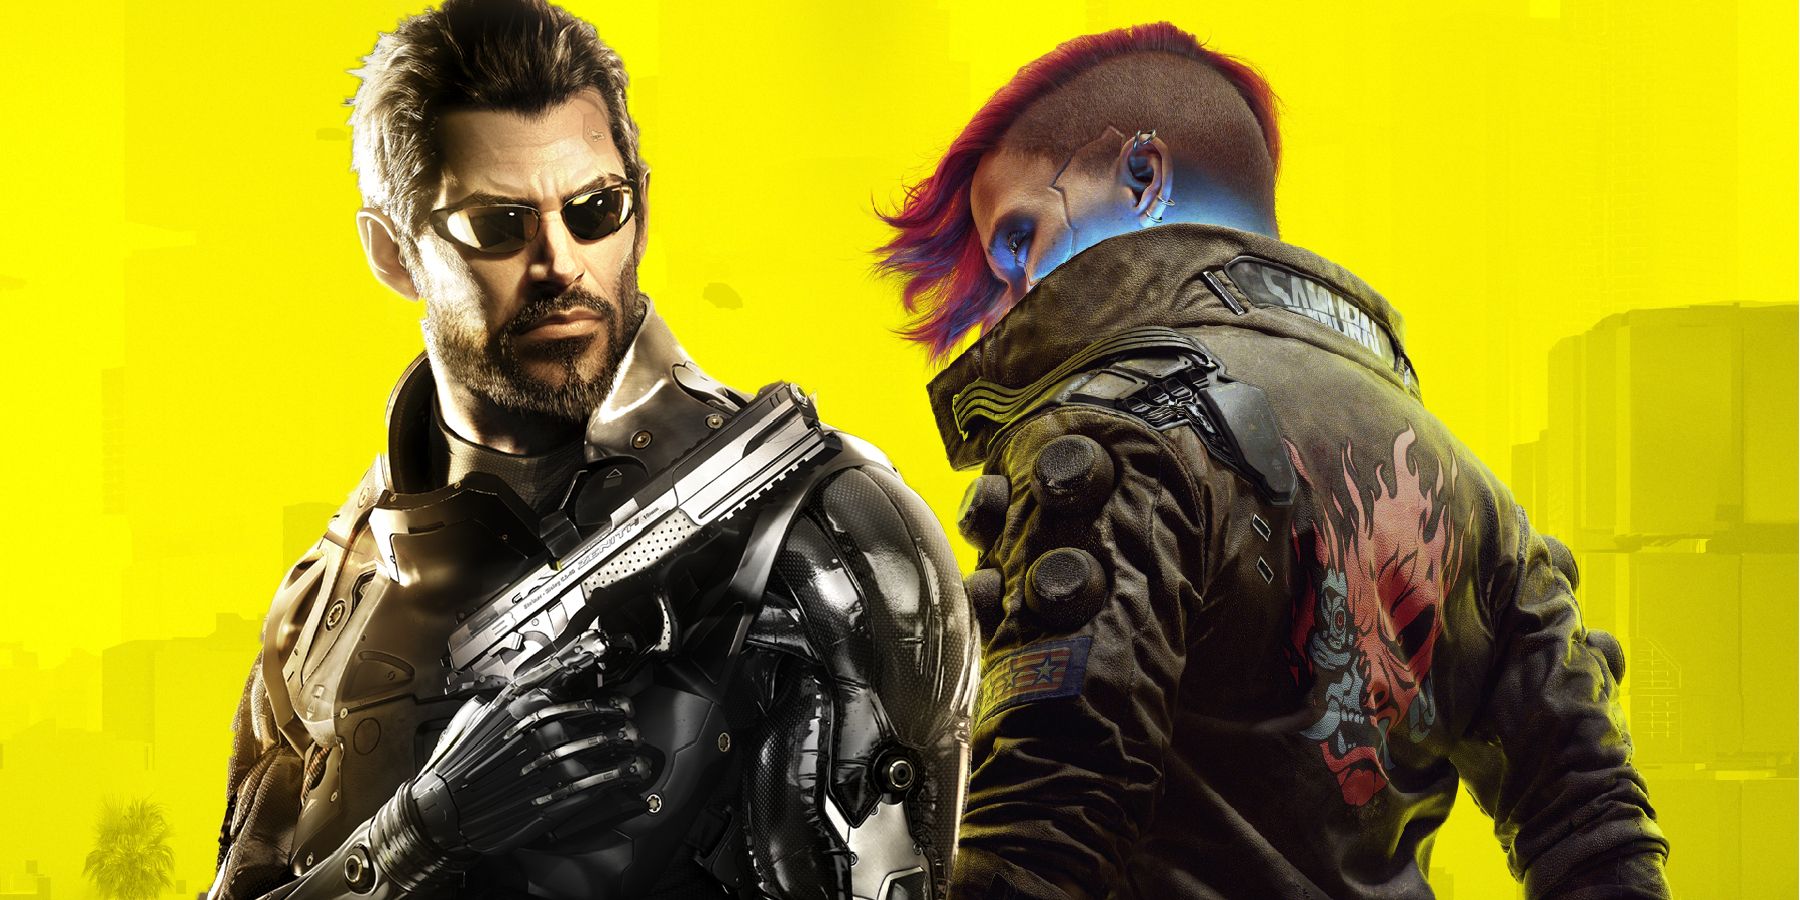 How Deus Ex Can Do What Cyberpunk 2077 Couldn't